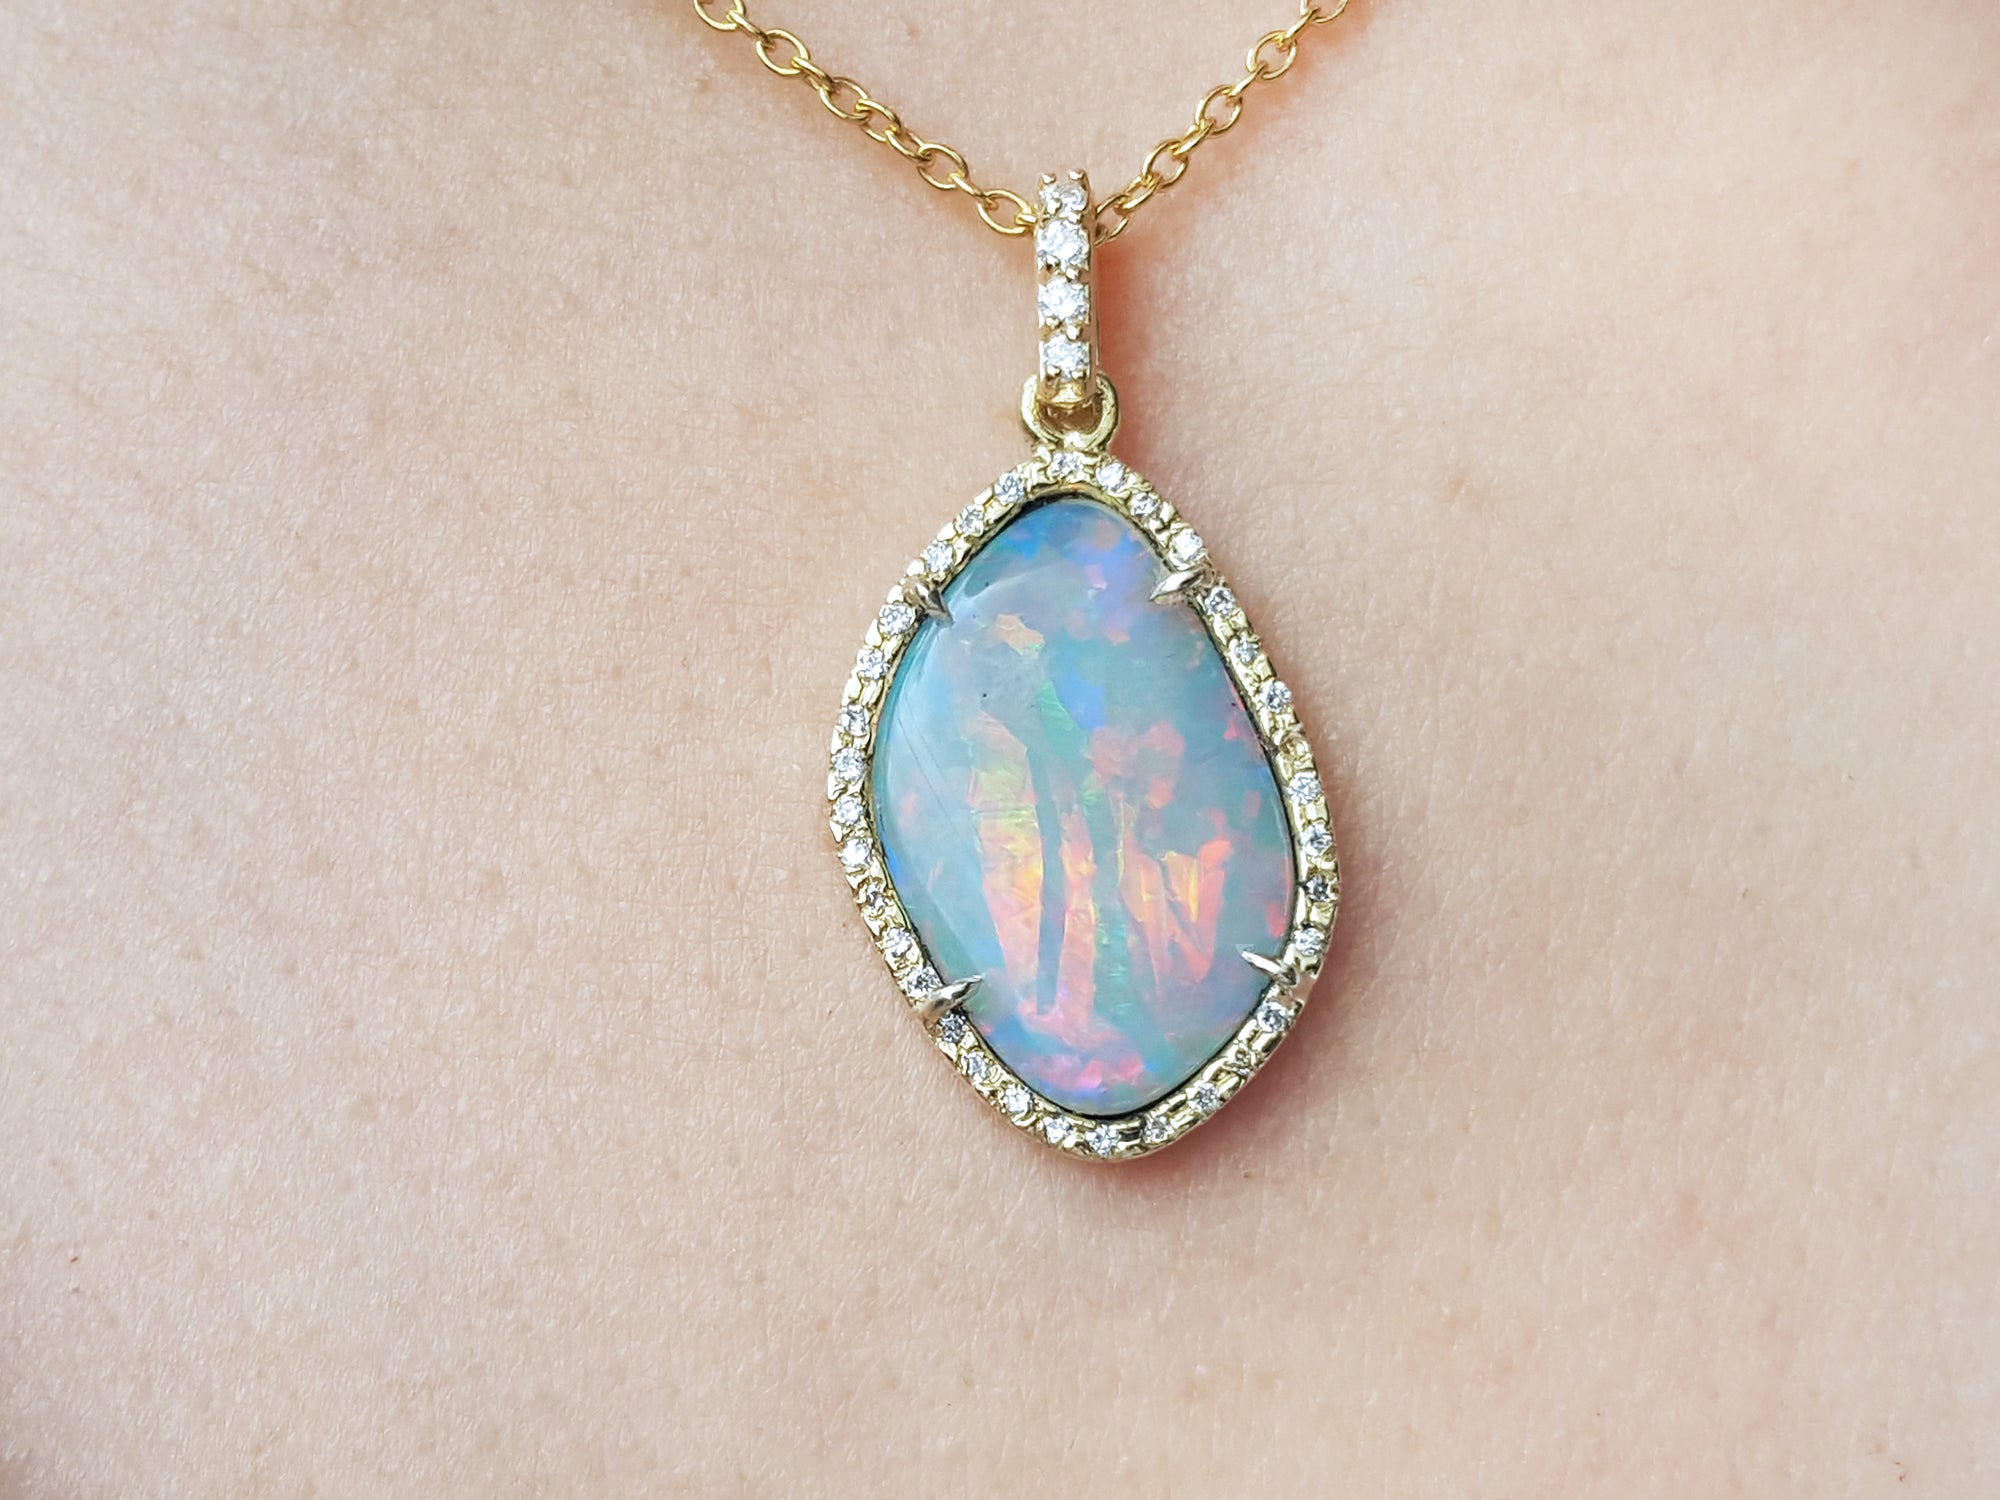 Opal and diamond necklacce